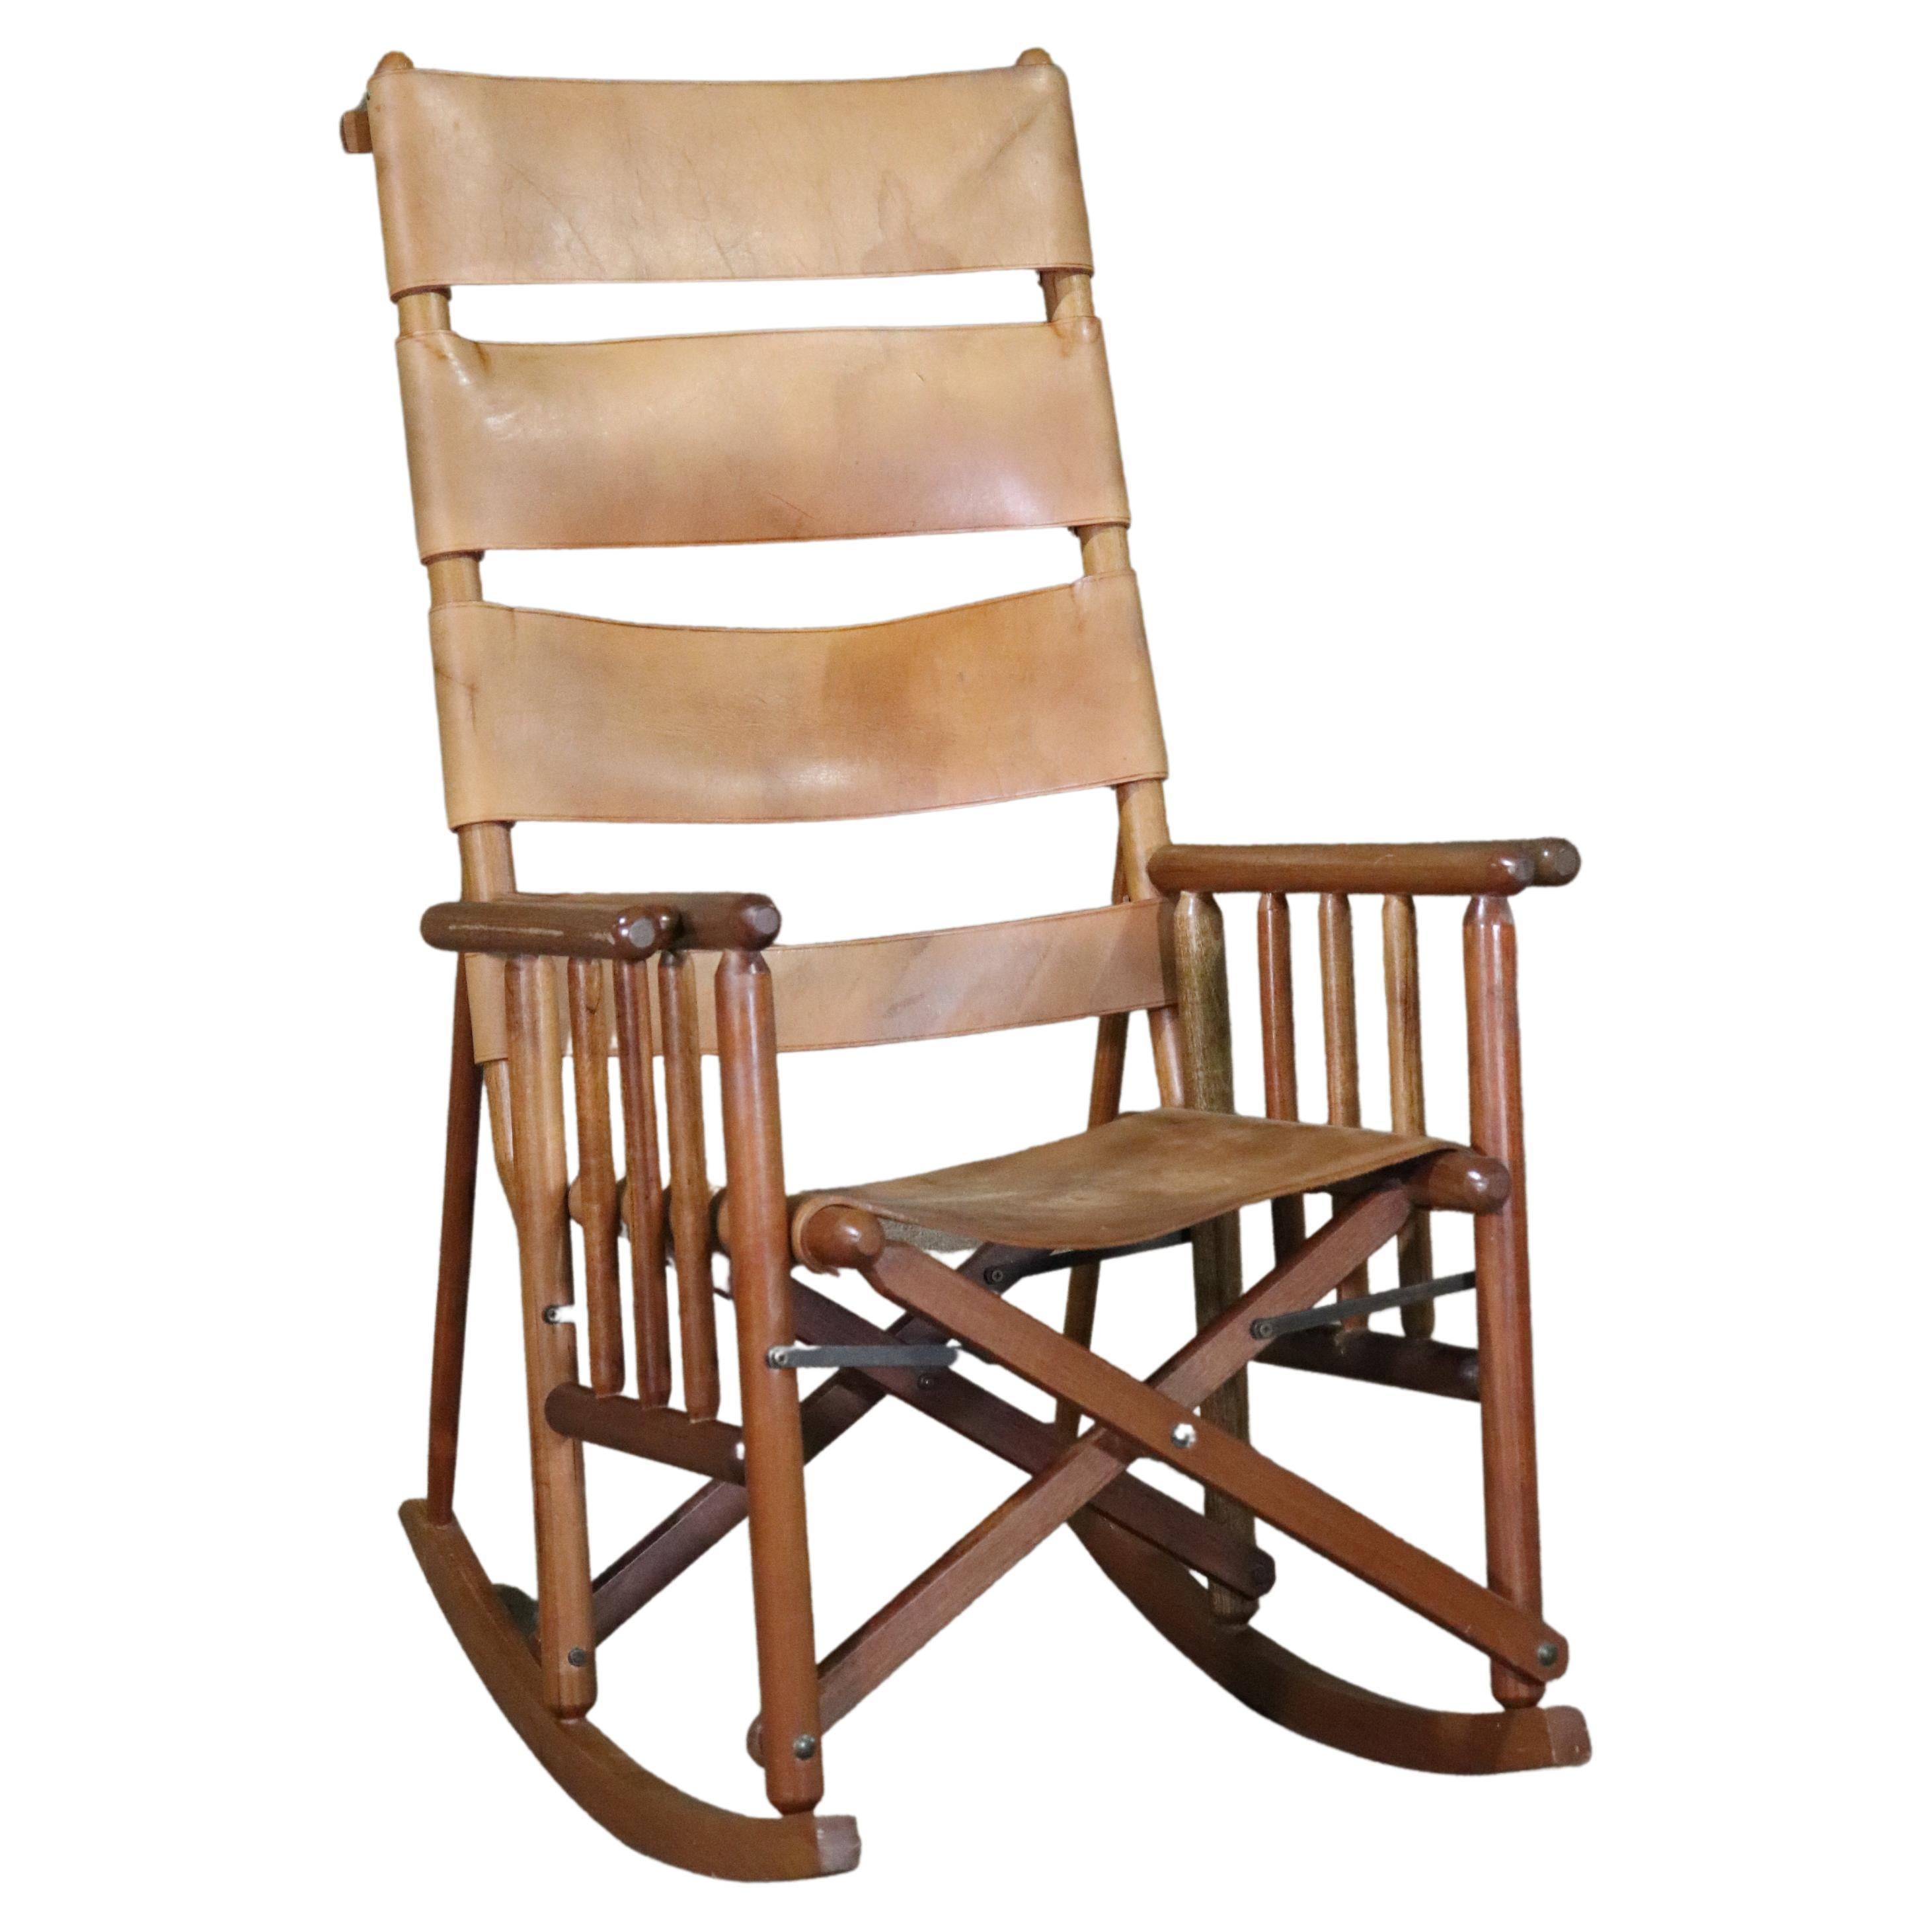 Folding Leather Strap Rocking Chair For Sale